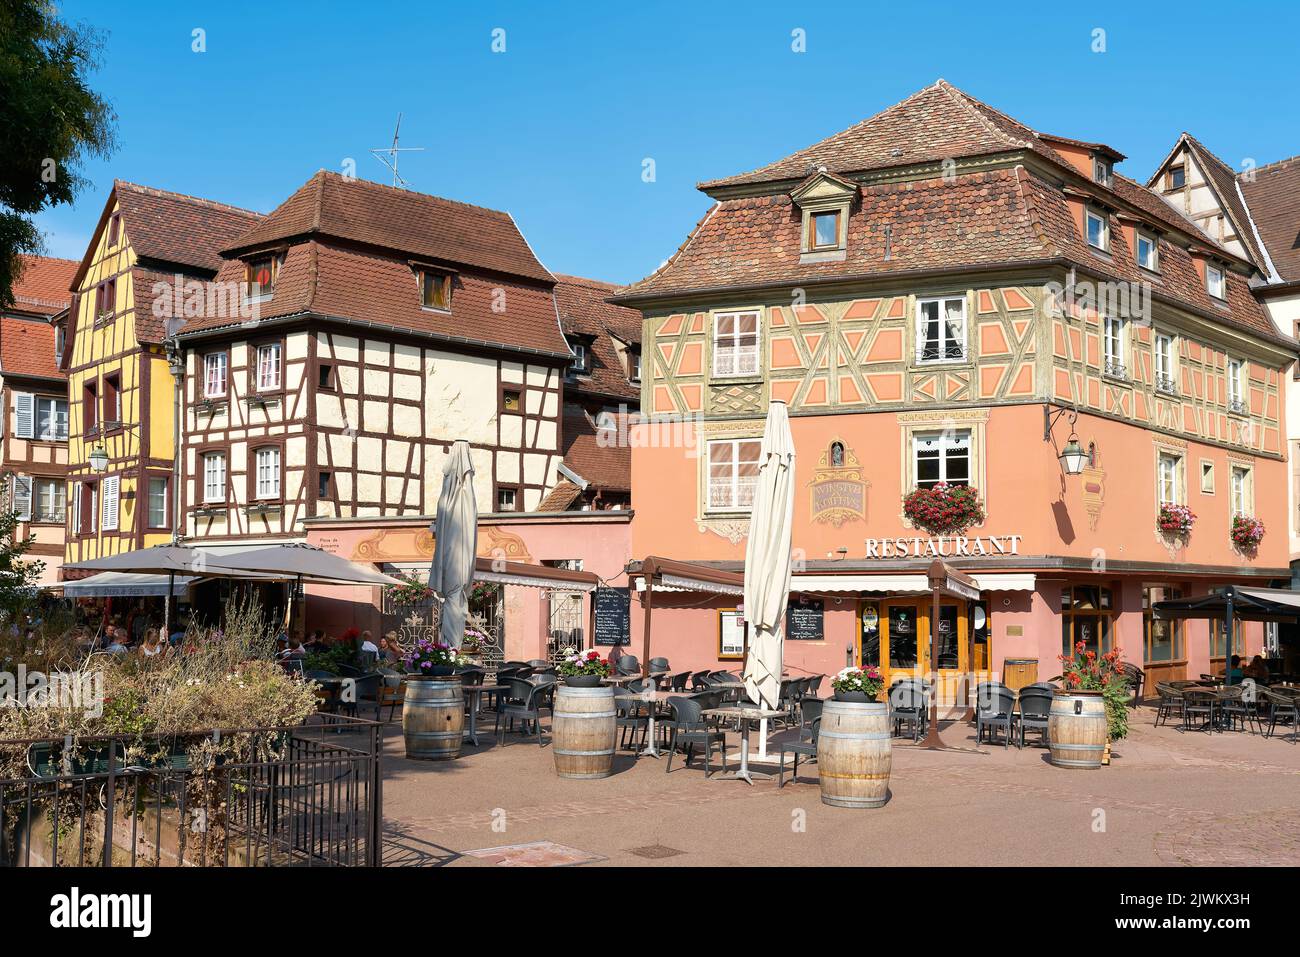 Historic picturesque old town of Colmar in France in Alsace with many restaurants and cafes Stock Photo